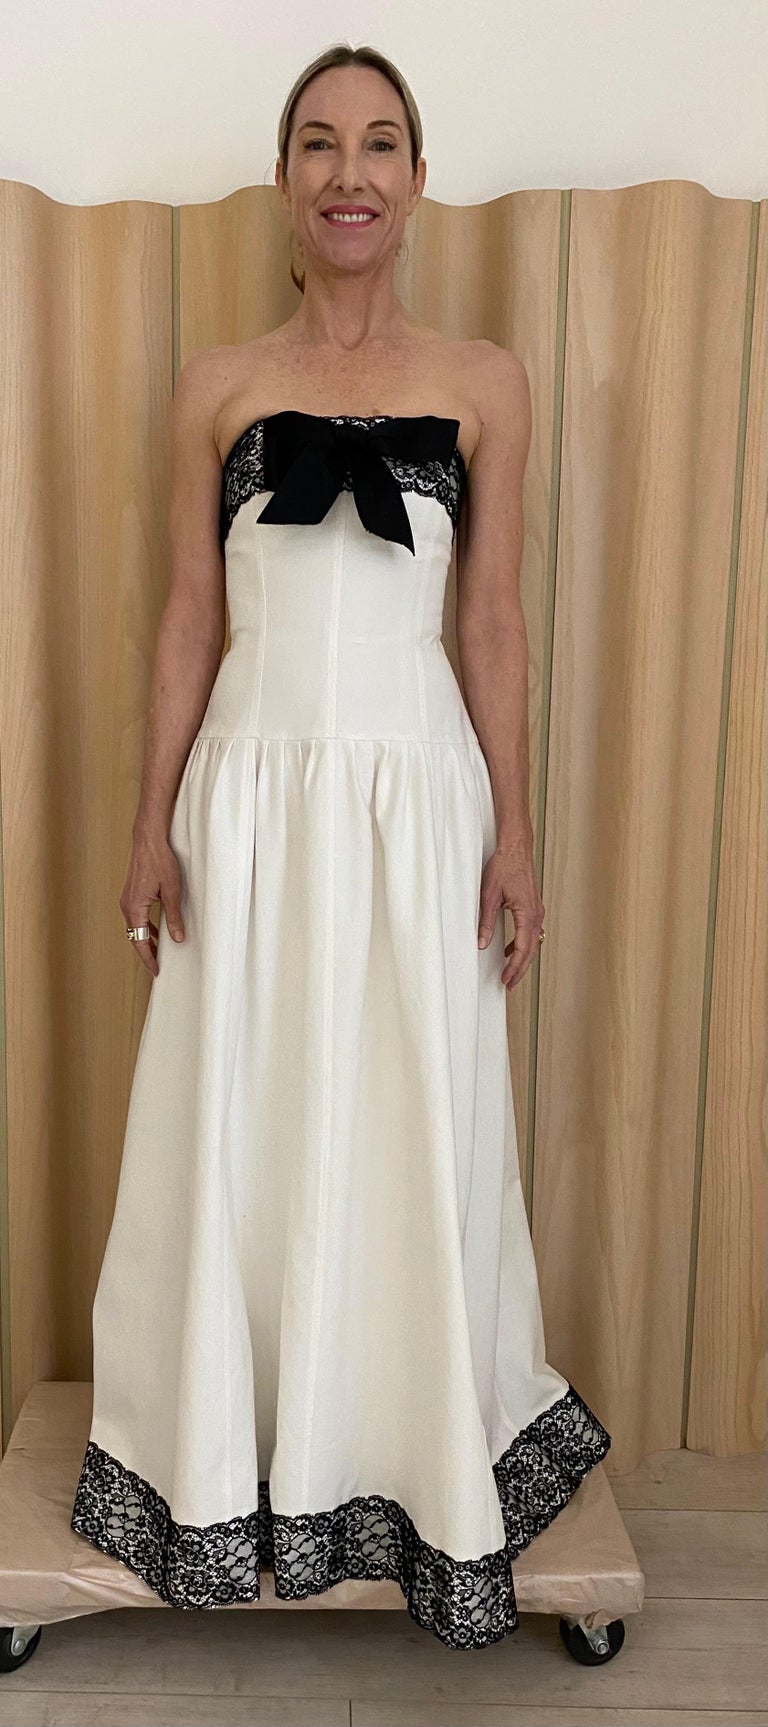 Chanel White and Black Cotton Pique Strapless Cocktail Dress